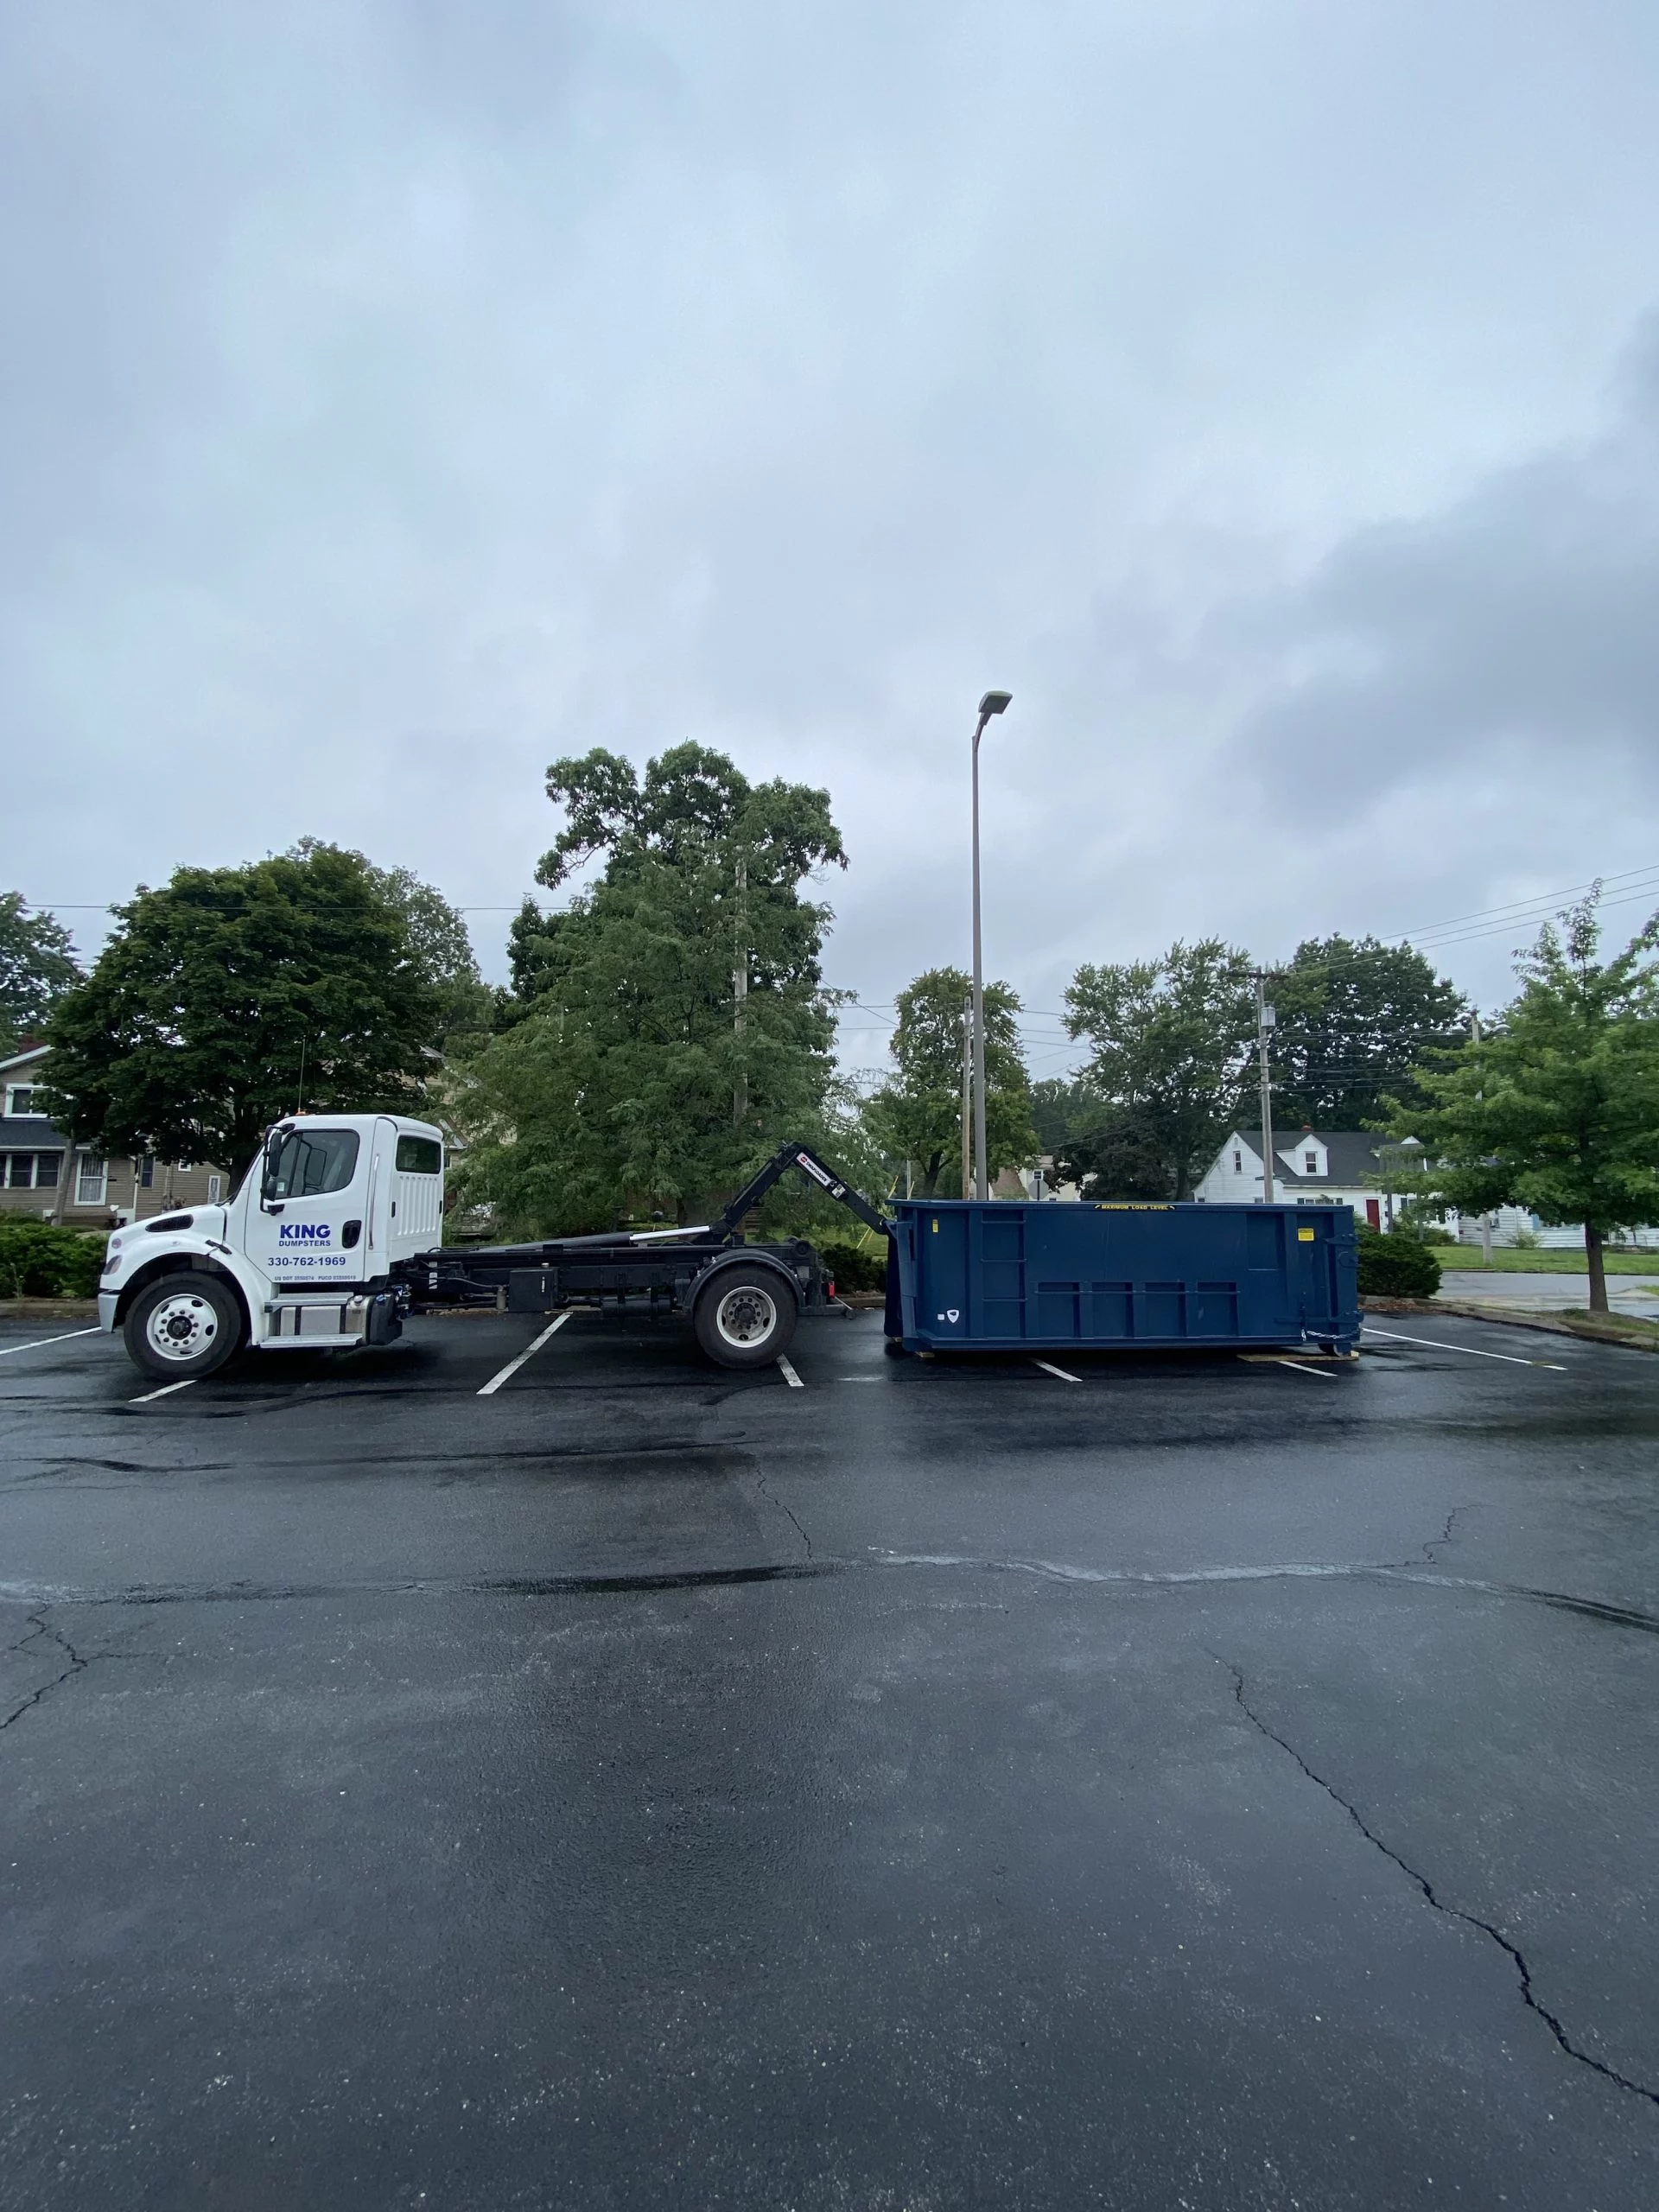 20 yard being delivered to parking lot by King Dumpsters in Akron, Ohio